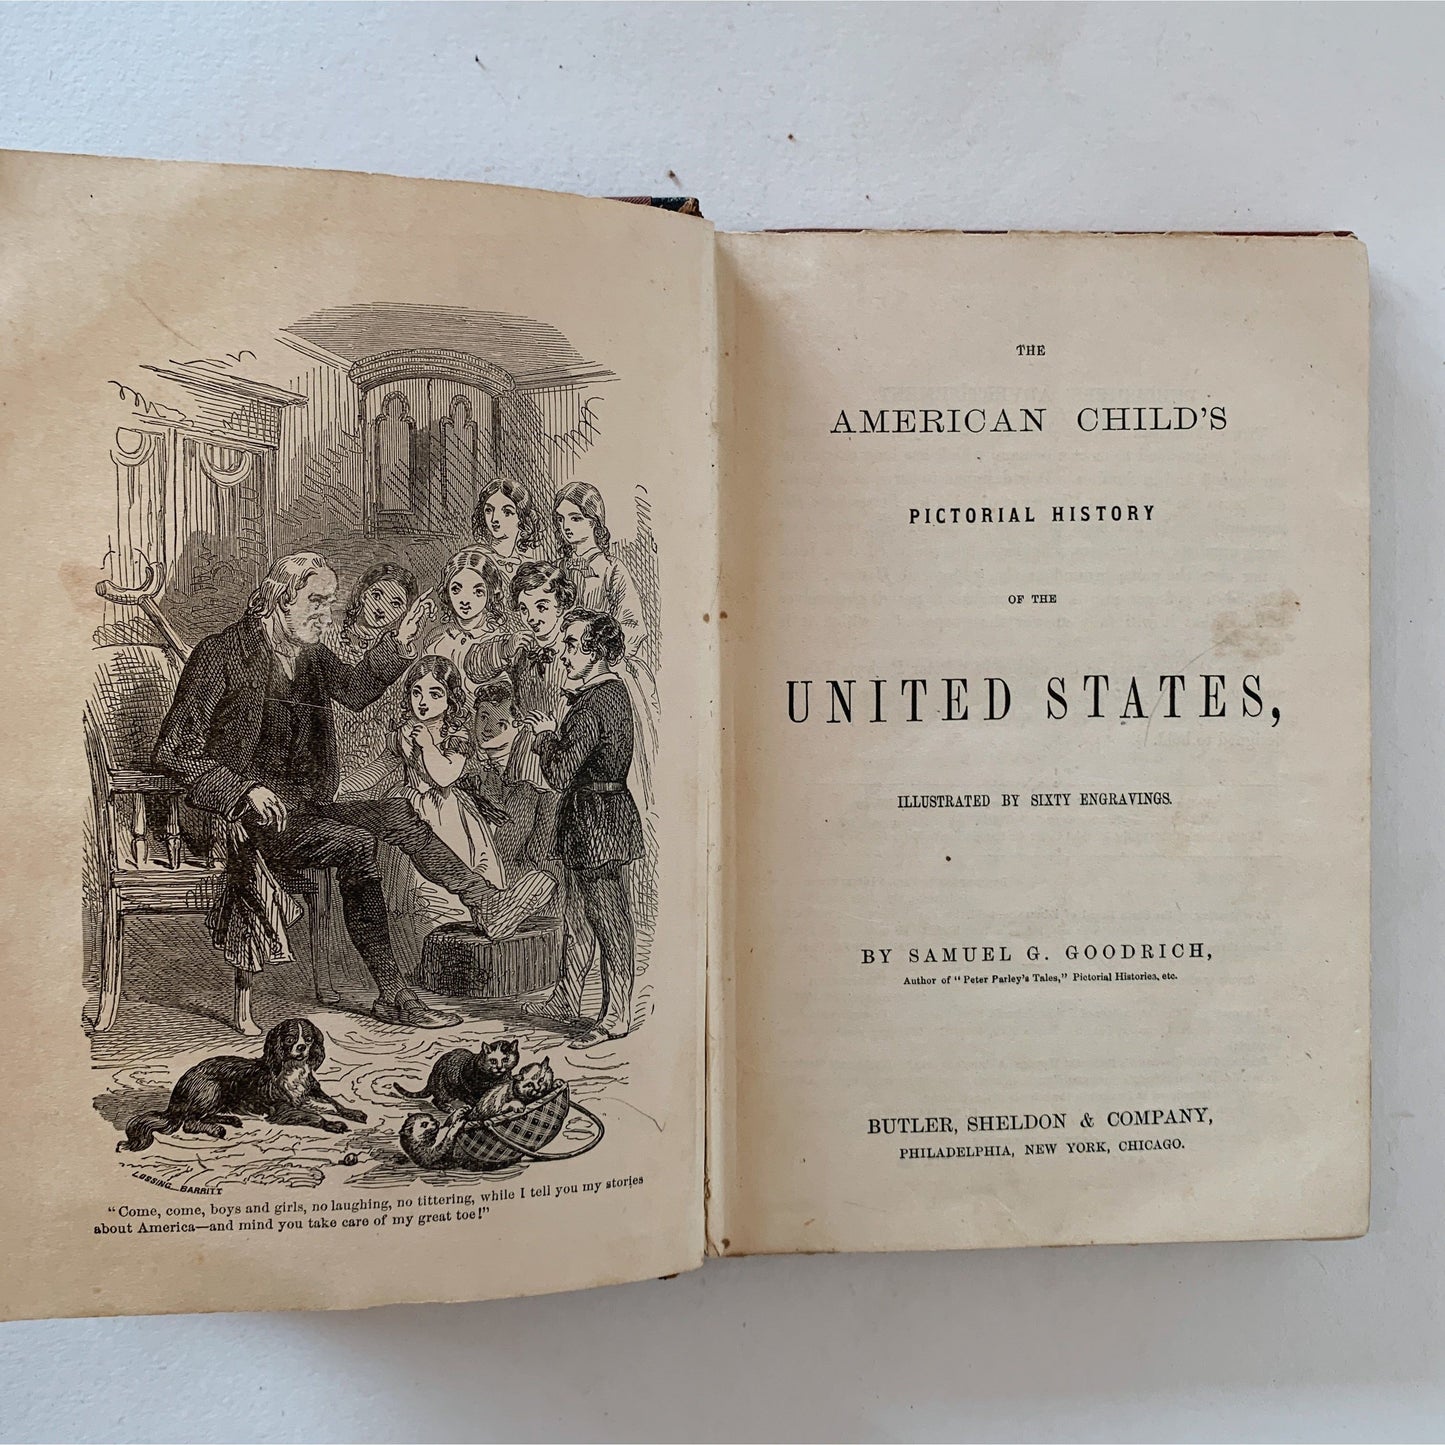 The American Child's Pictorial History of the United States, 1865 School Book